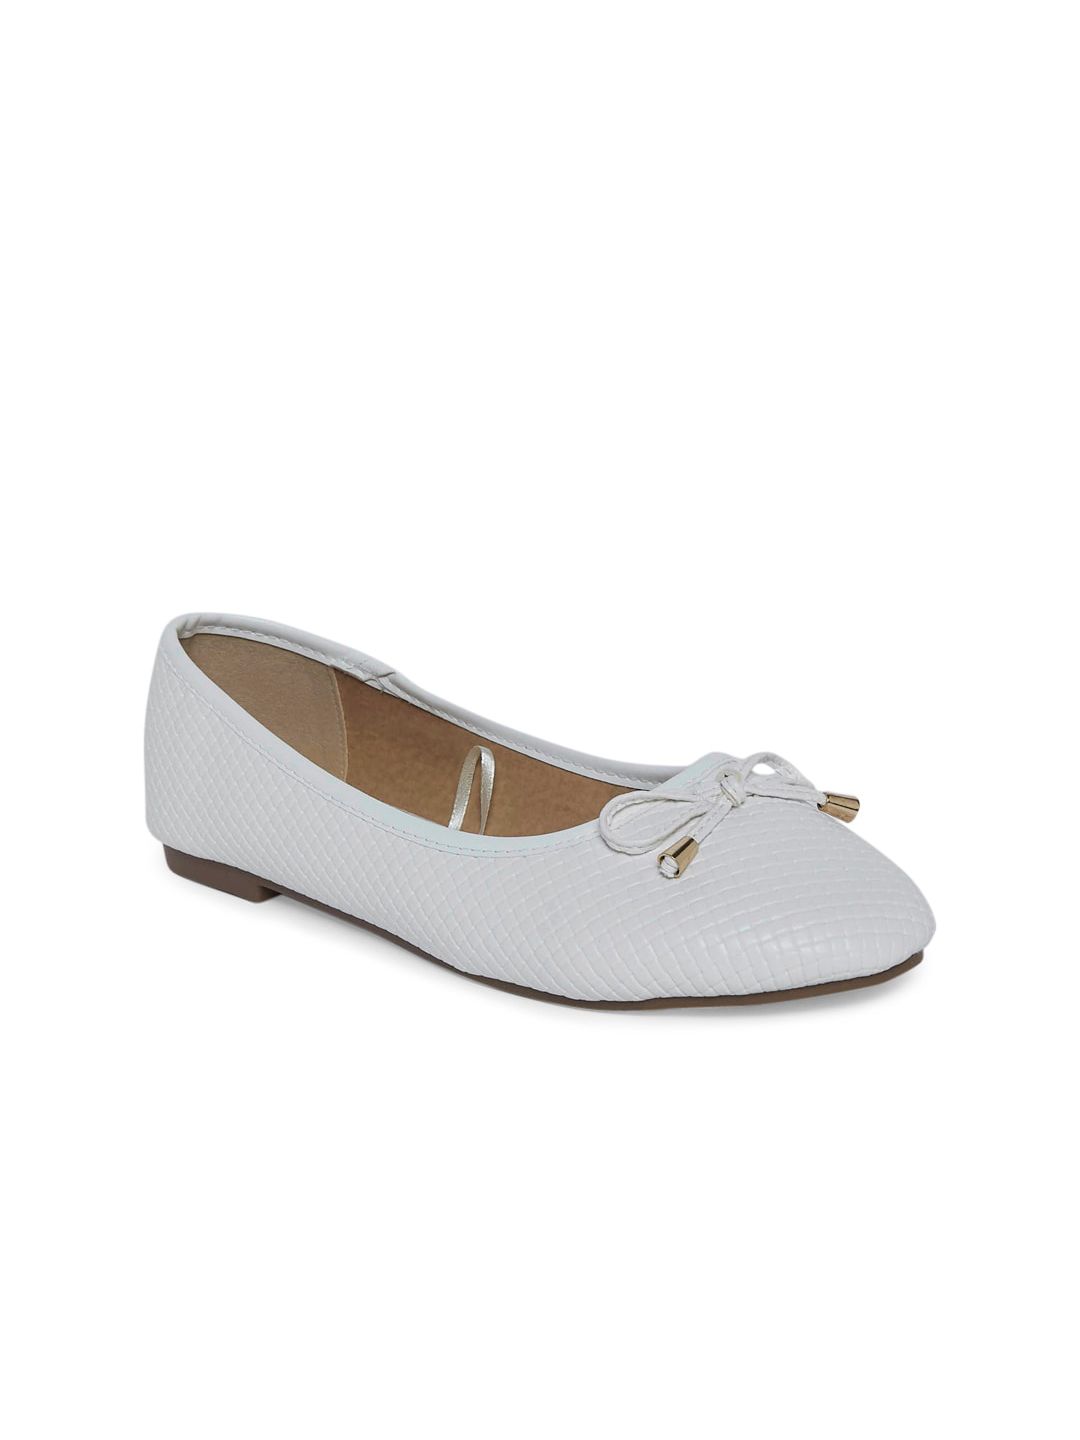 Forever Glam by Pantaloons Women Off White Textured Ballerinas with Bows Flats Price in India